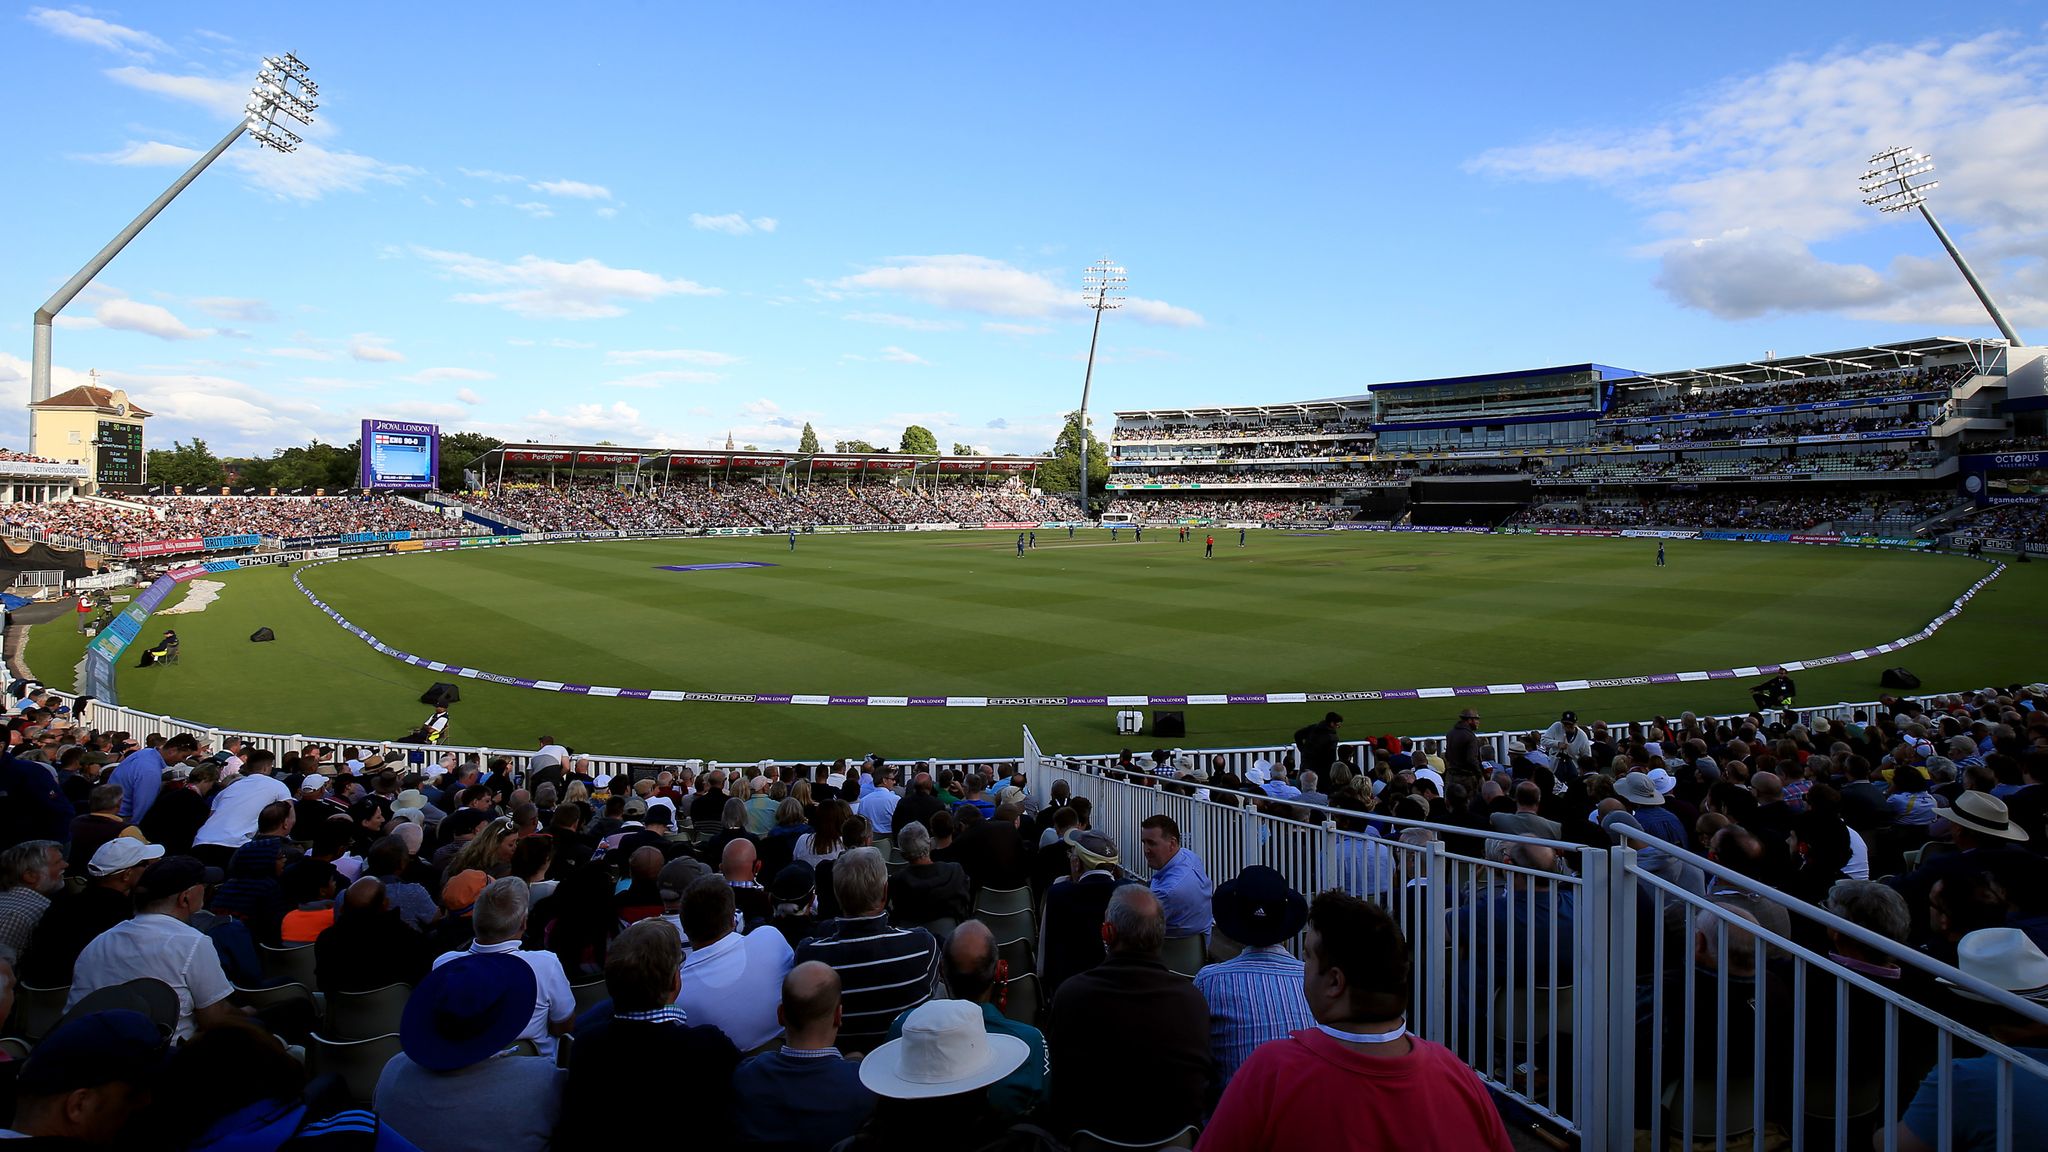 England Test vs New Zealand at Edgbaston to have 18,000 fans a day in Government pilot event | Cricket News | Sky Sports